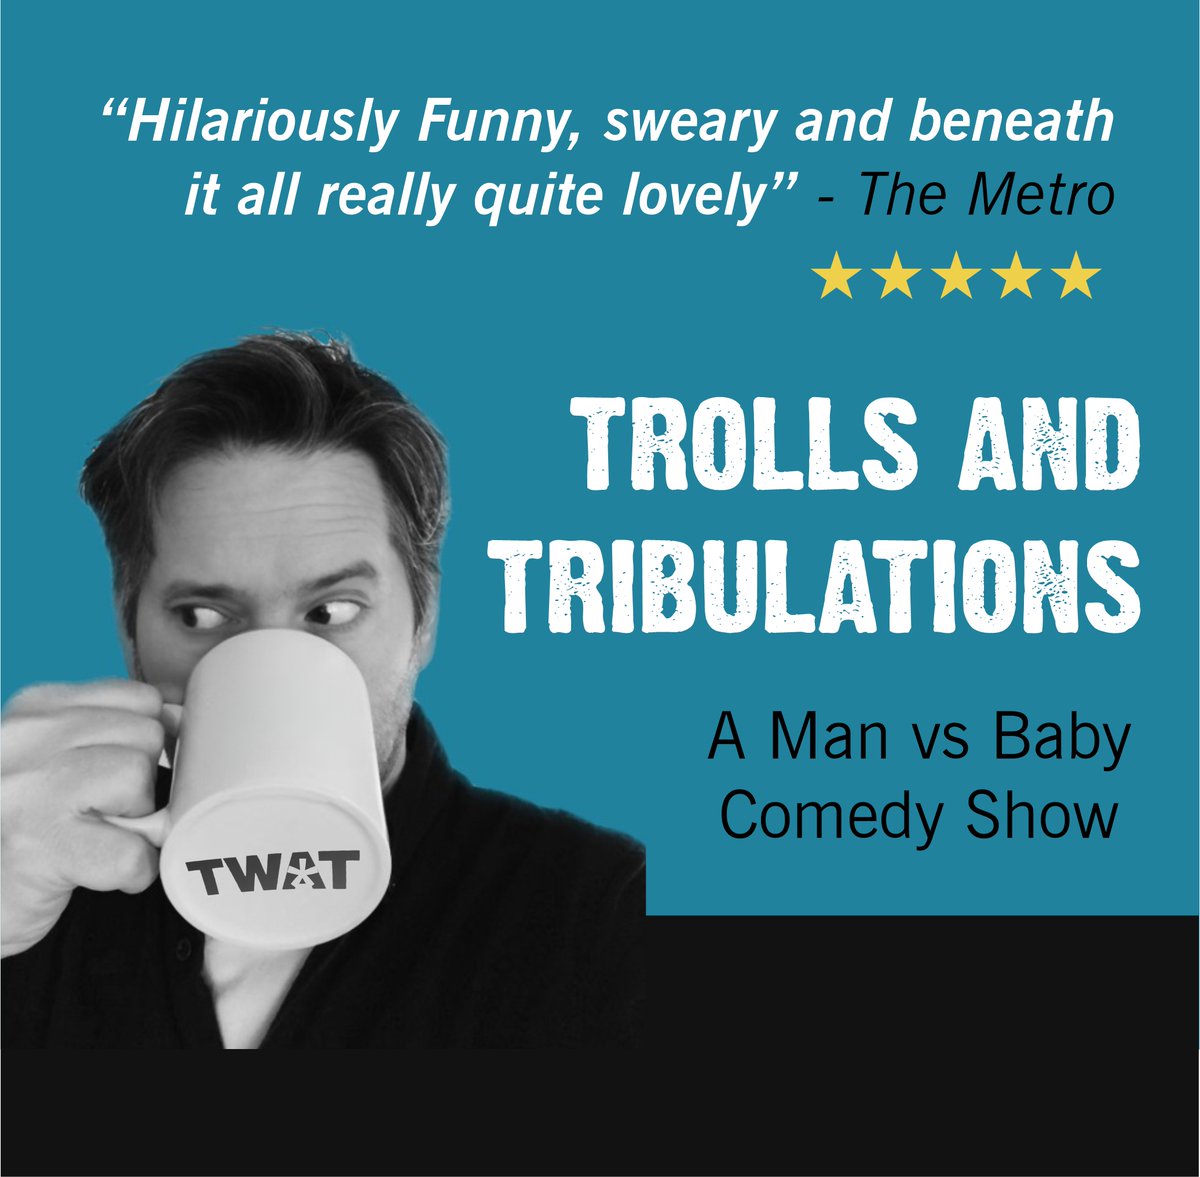 Man Vs Baby is on TONIGHT! Matt Coyne is the creator of blog ‘Man vs Baby’. On his ‘Trolls and Tribulations’ comedy tour he tells the story of how ‘Man vs Baby’ began, the story of a lady called Brenda, and all about his run-in with Halle Berry. Tickets: tickets.41monkgate.co.uk